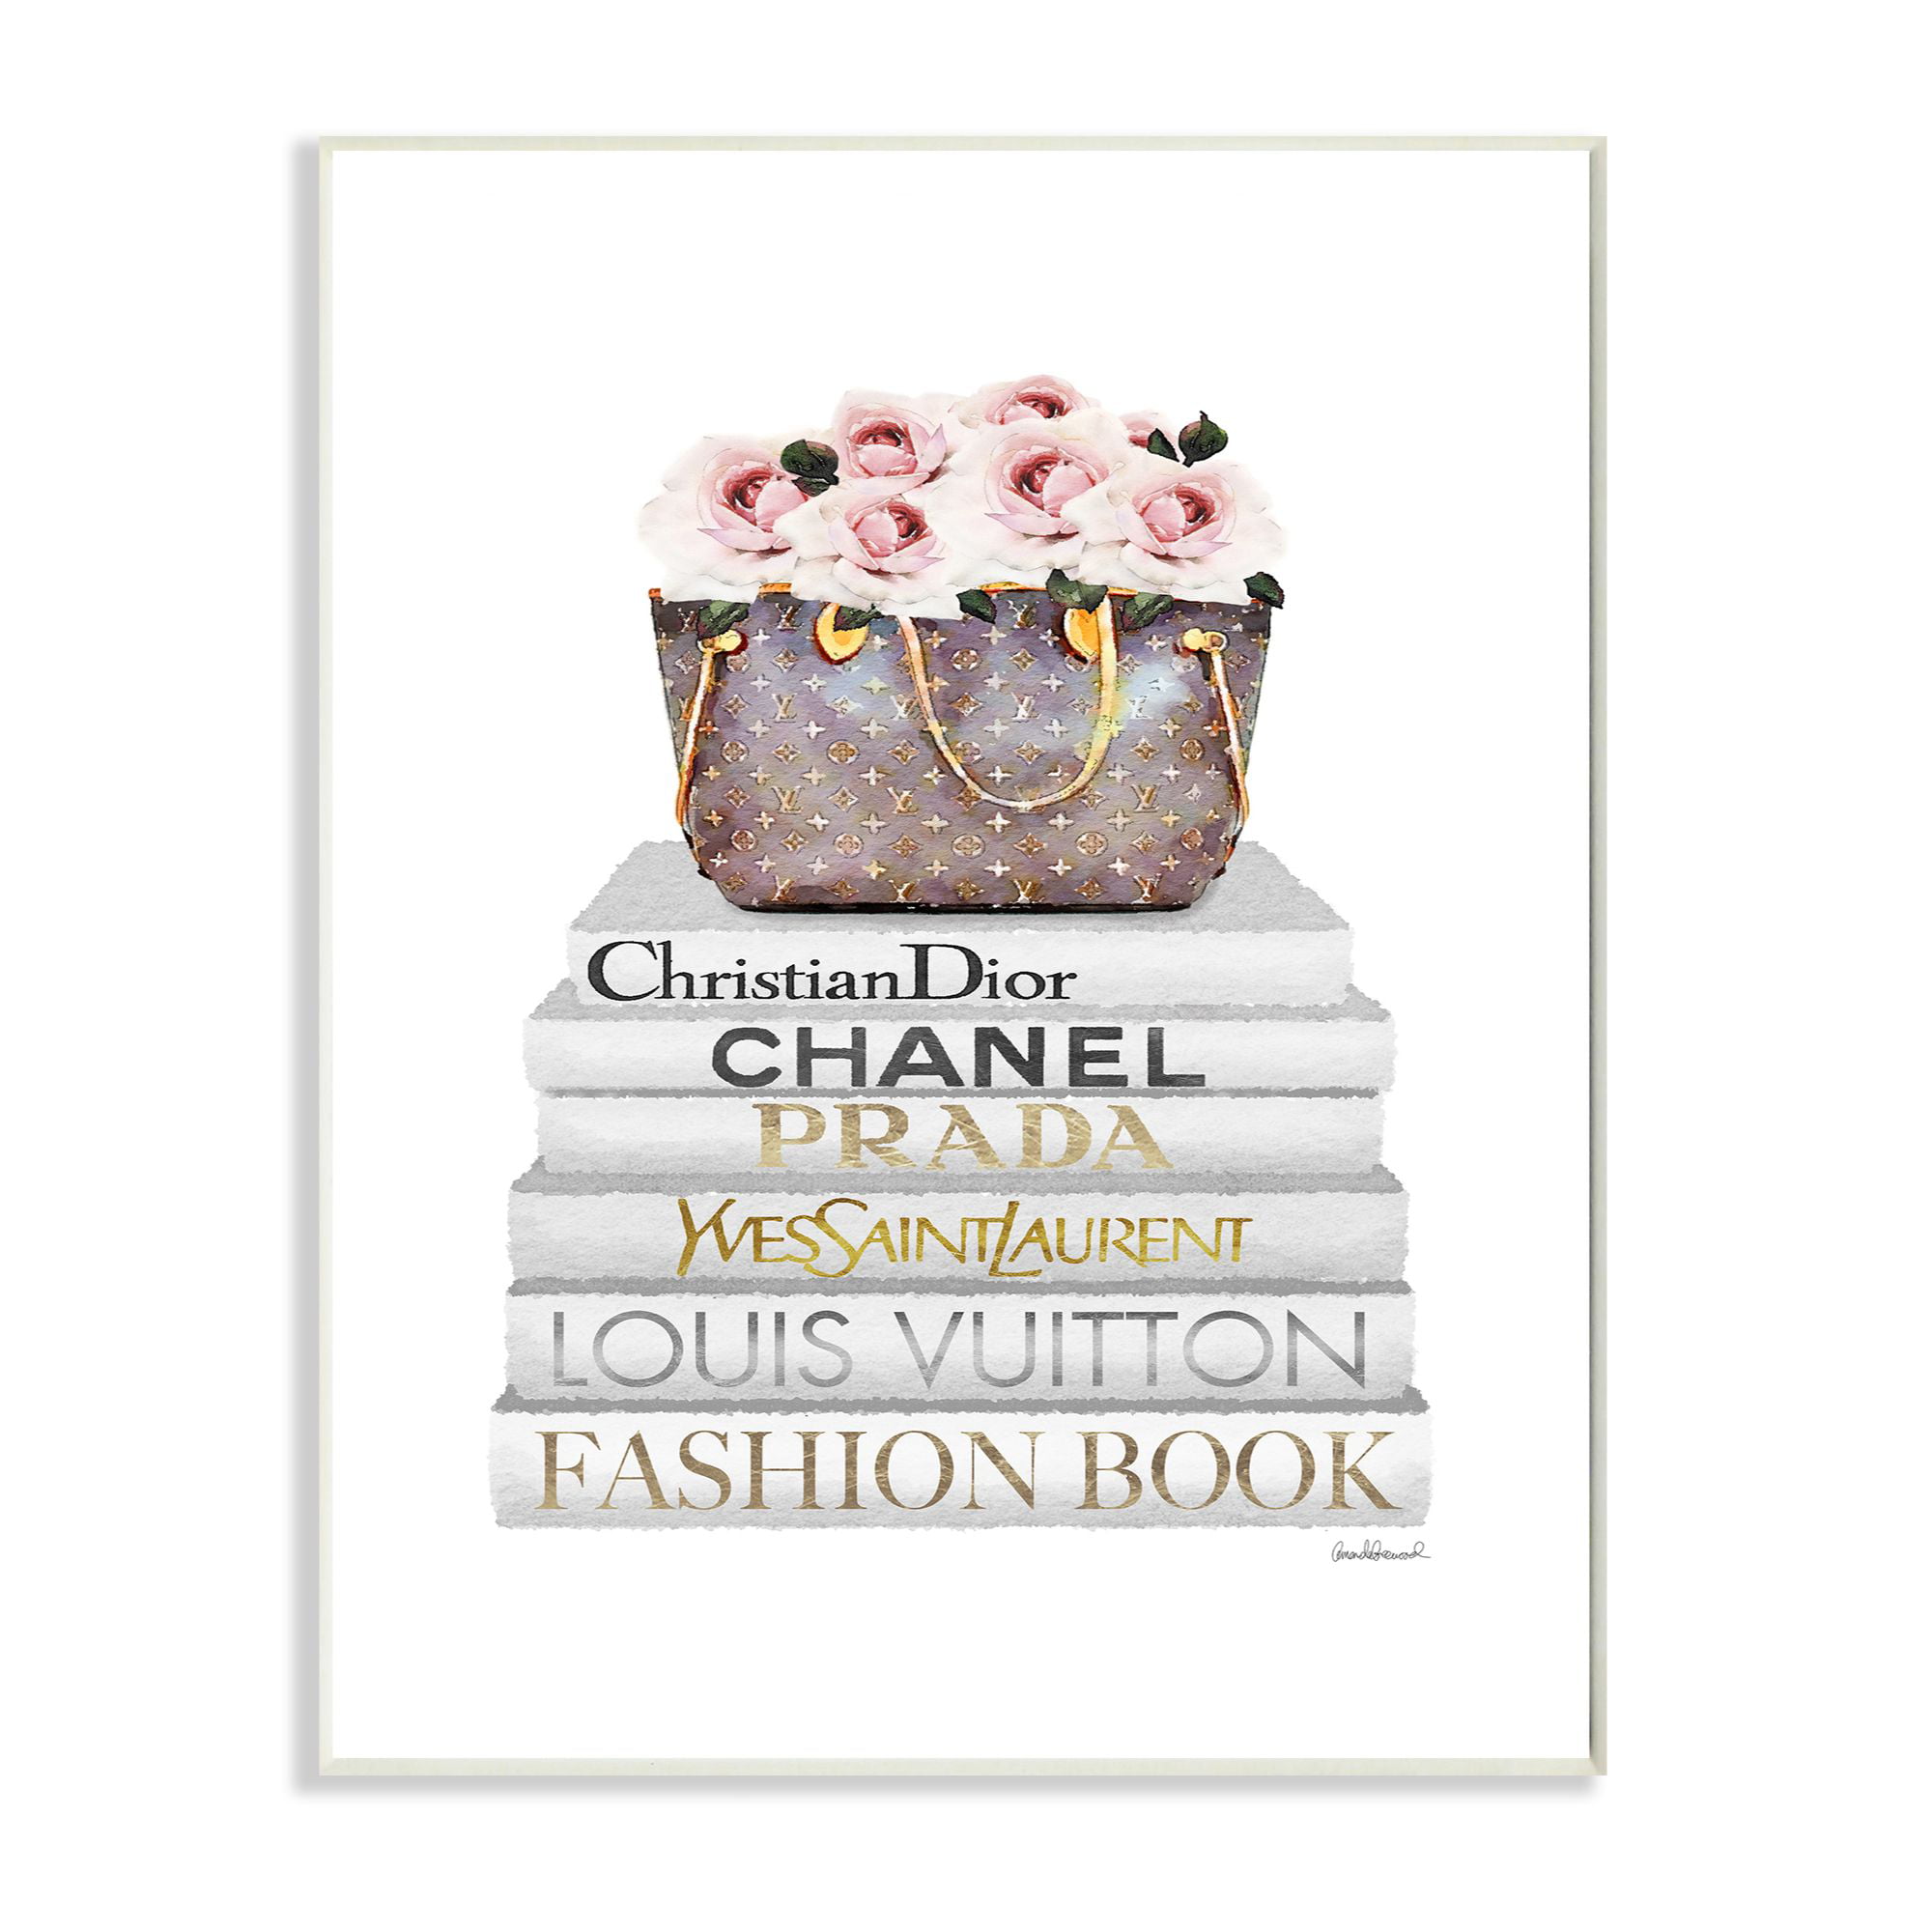 Stupell Industries Fashion Designer Purse Bookstack Black and White Watercolor Framed Wall Art by Amanda Greenwood